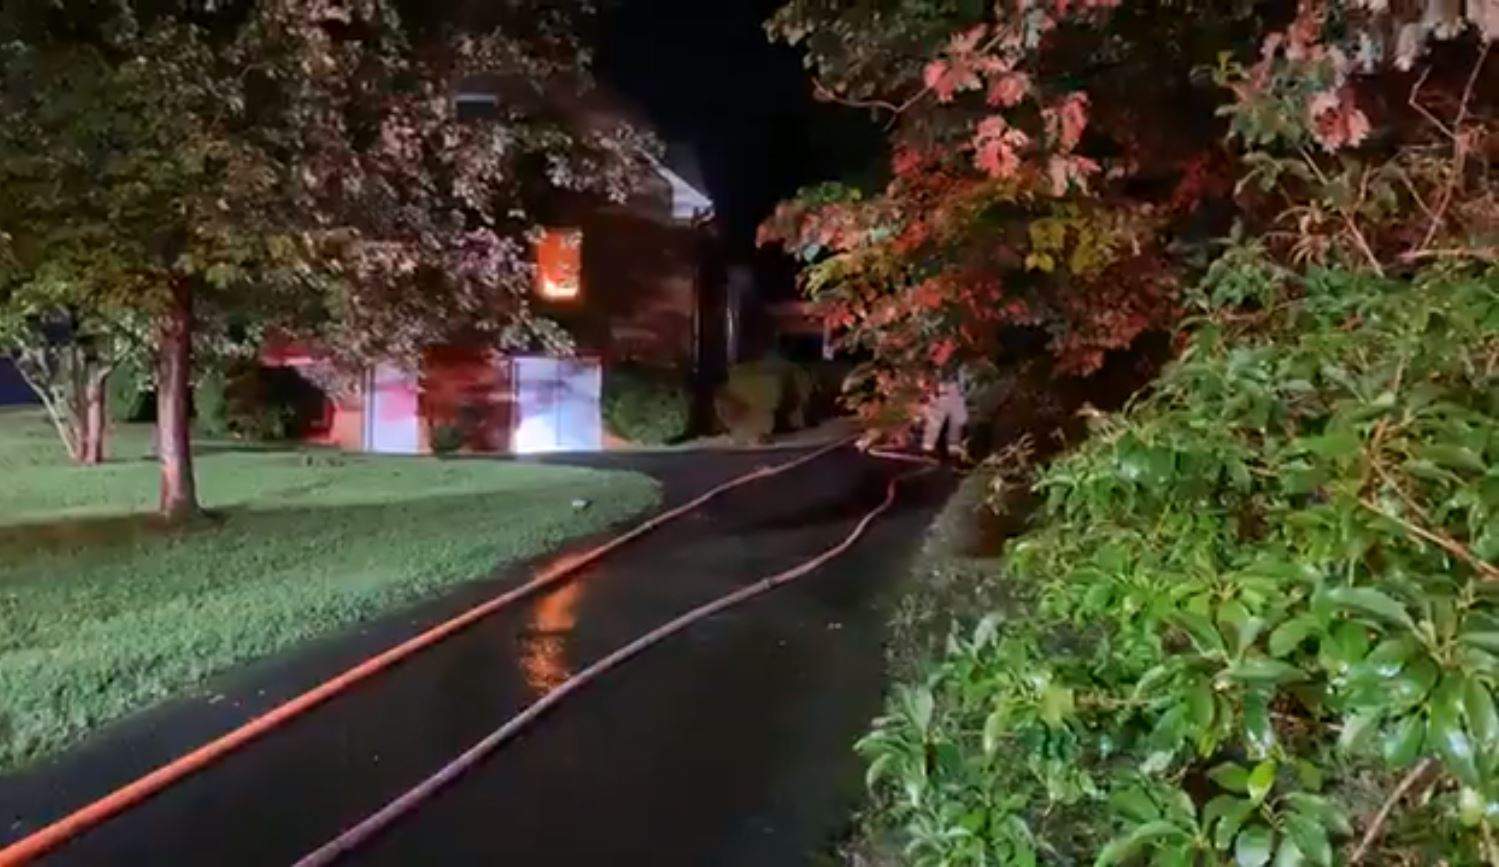 Crews on scene of house fire in Henry County